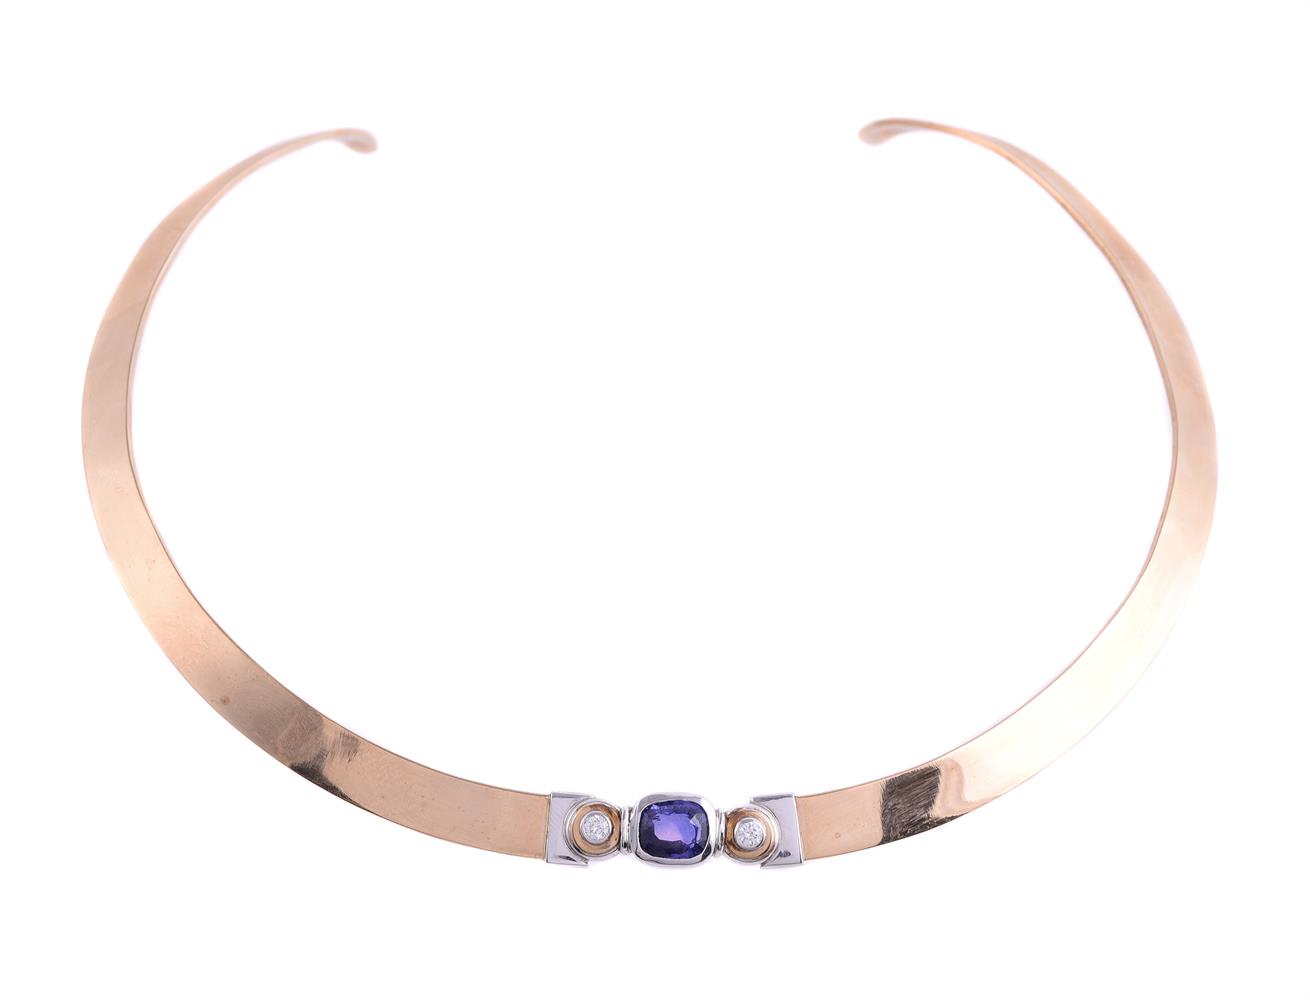 A 9 CARAT GOLD, DIAMOND AND SAPPHIRE COLLAR NECKLACE BY ANTHONY JAMES FURMINGER, LONDON 2001